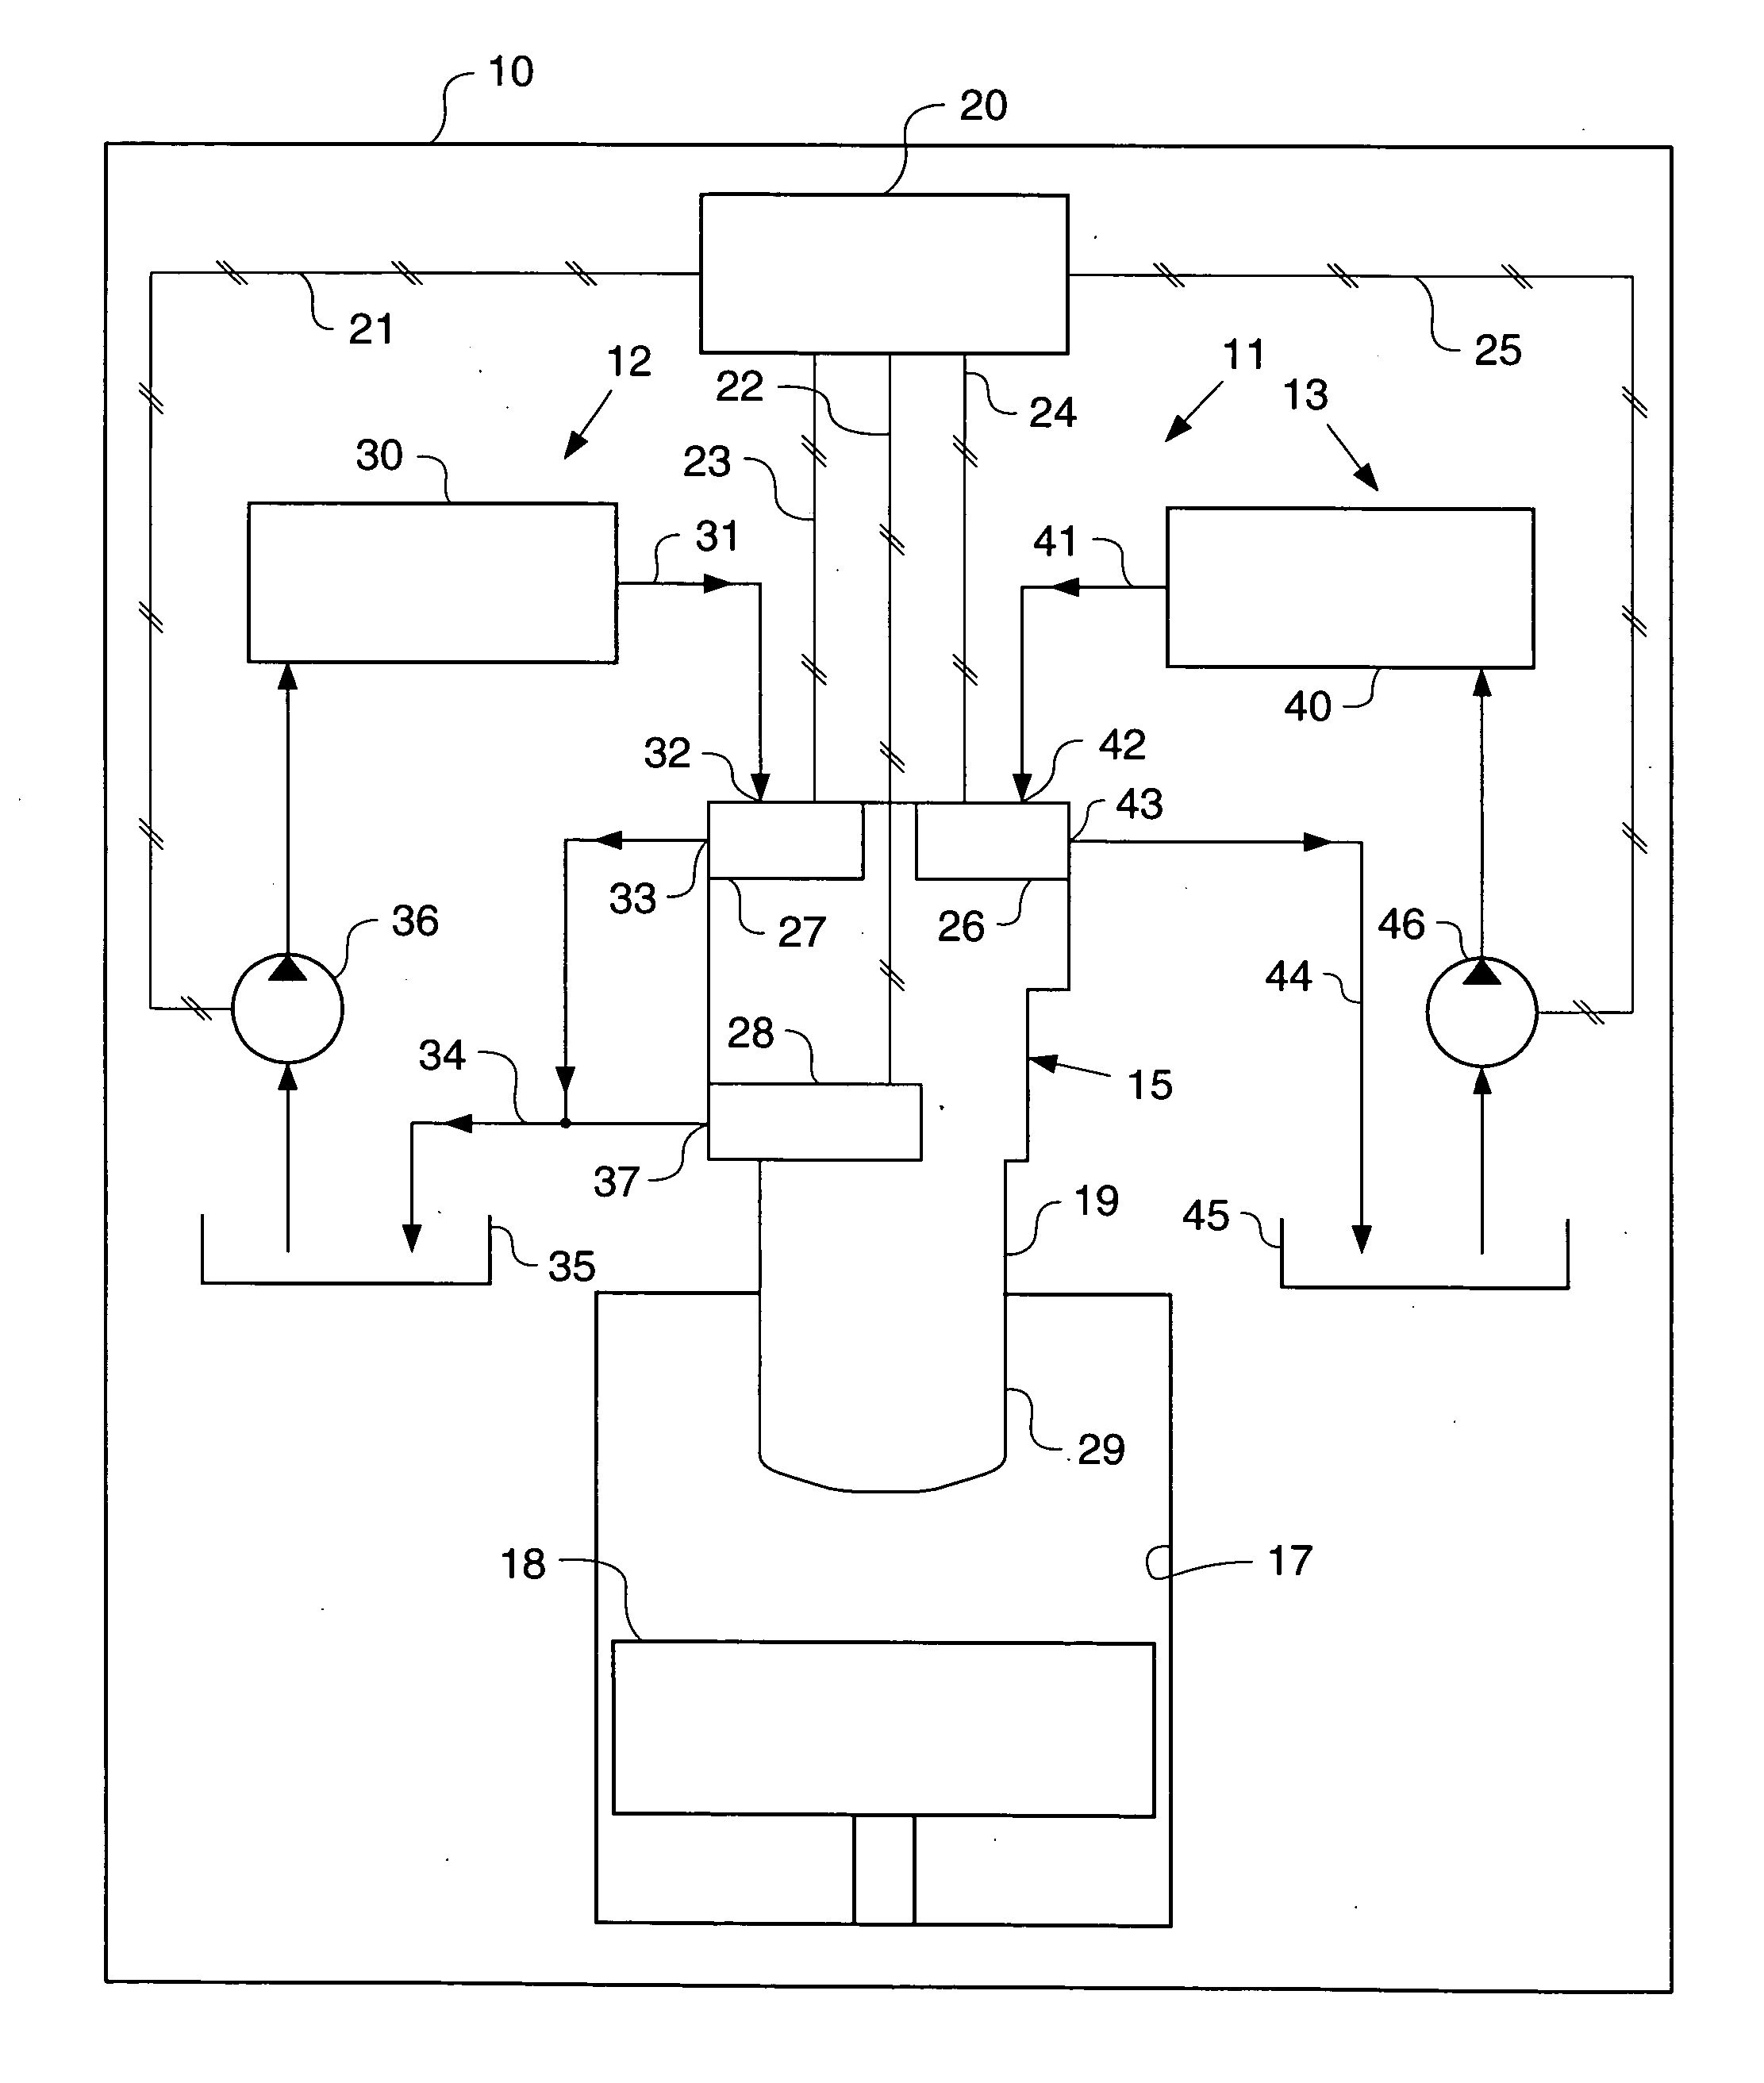 Injection of fuel vapor and air mixture into an engine cylinder